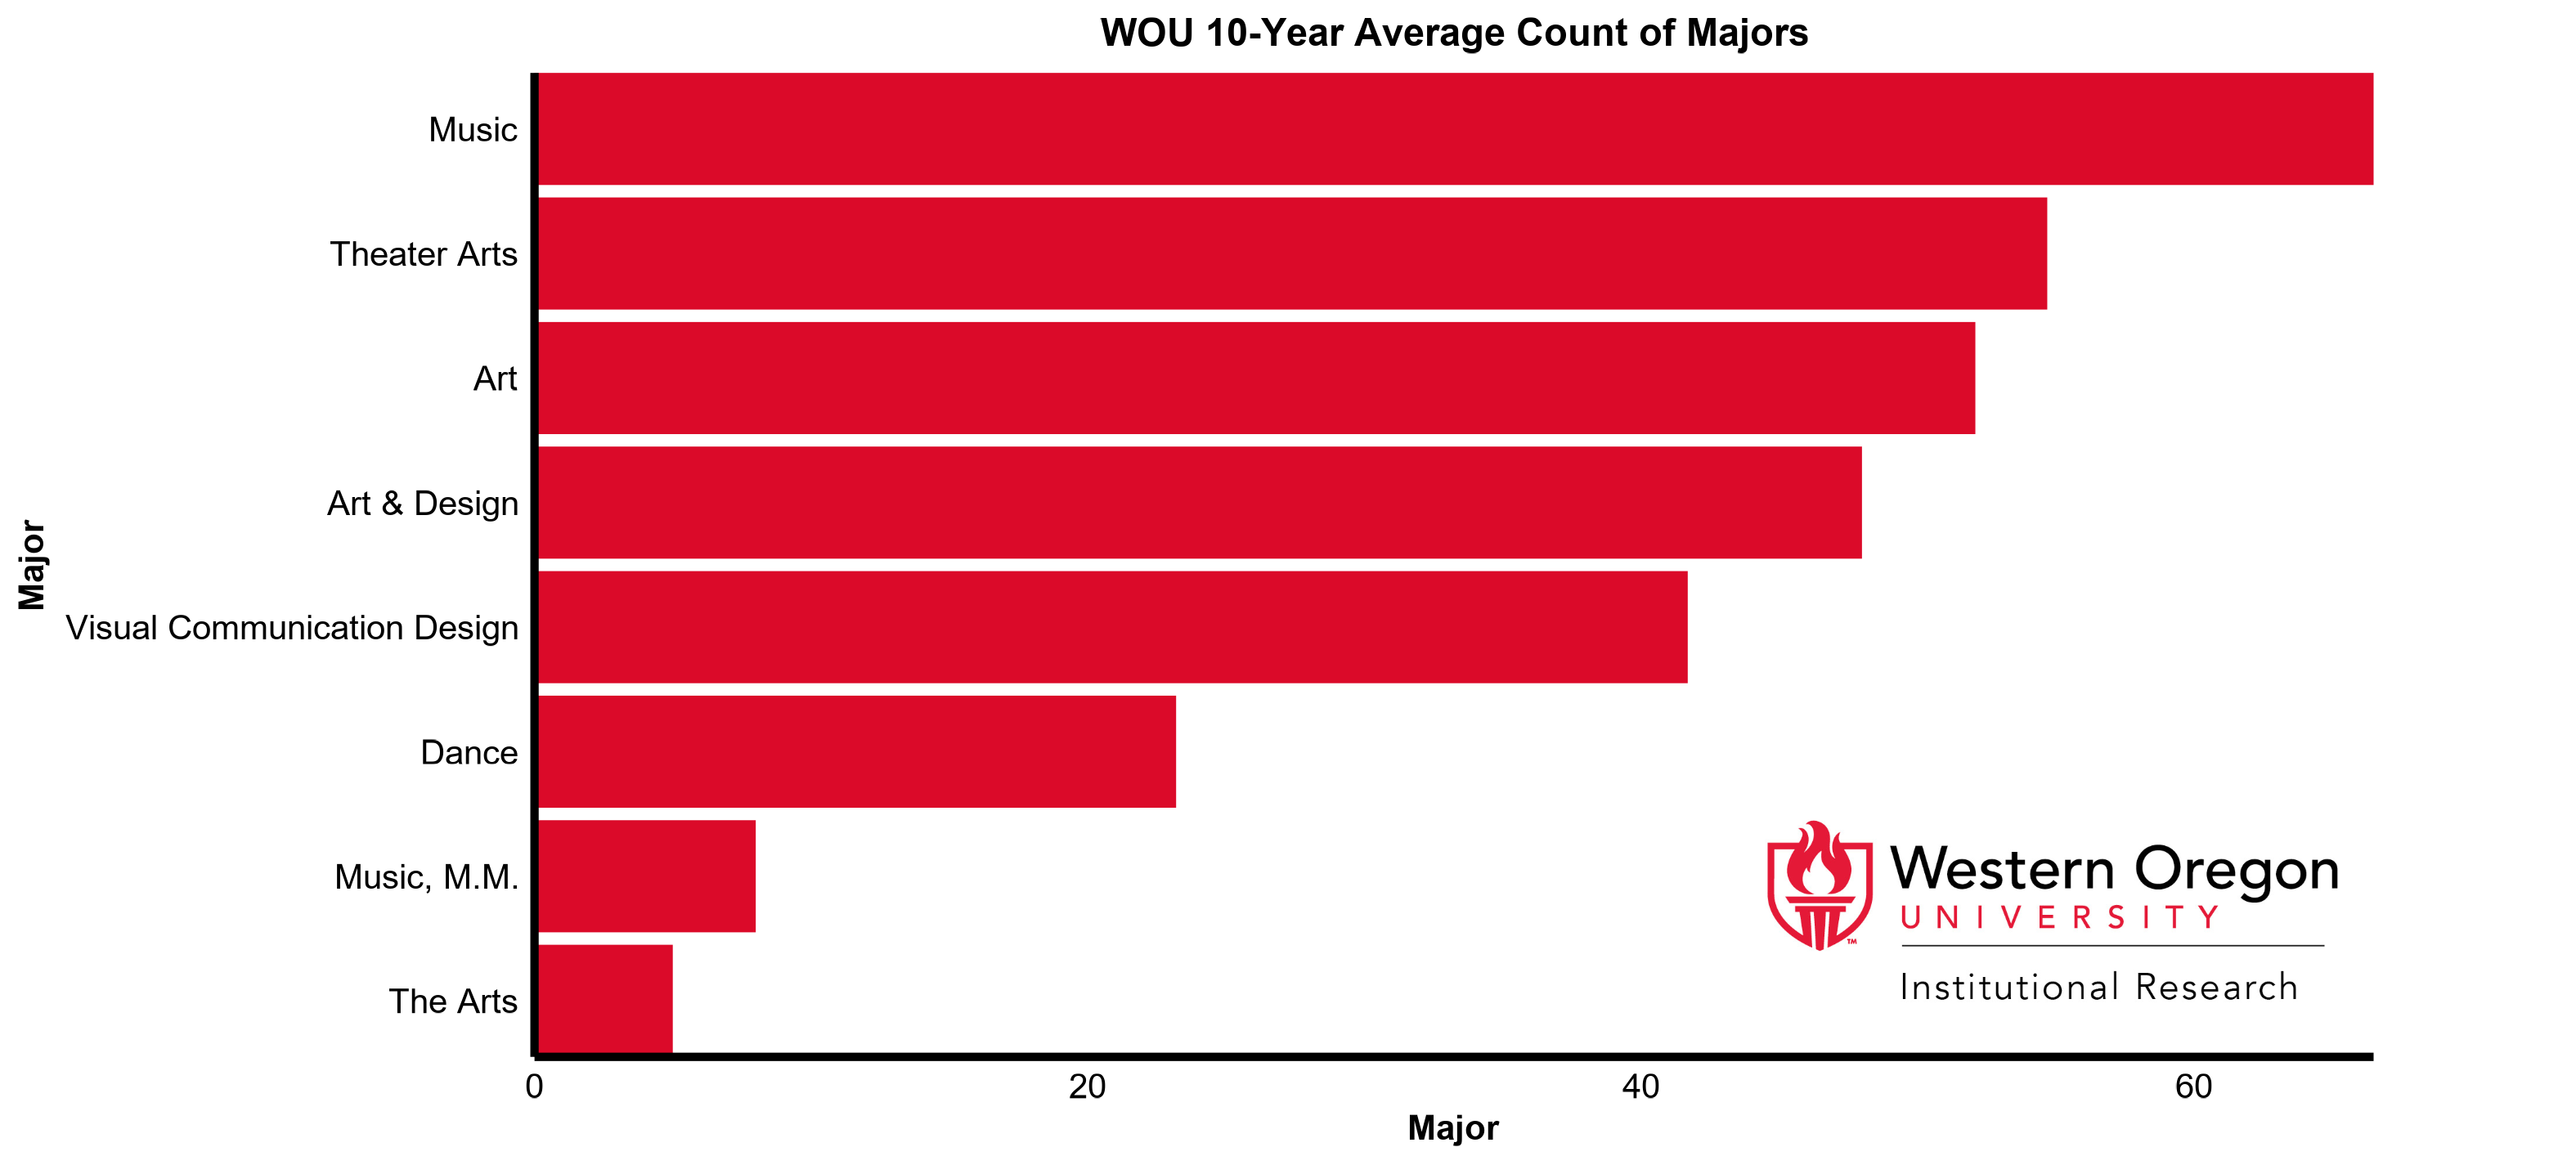 Bar graph of the 10-year average count of majors at WOU for the Creative Arts division